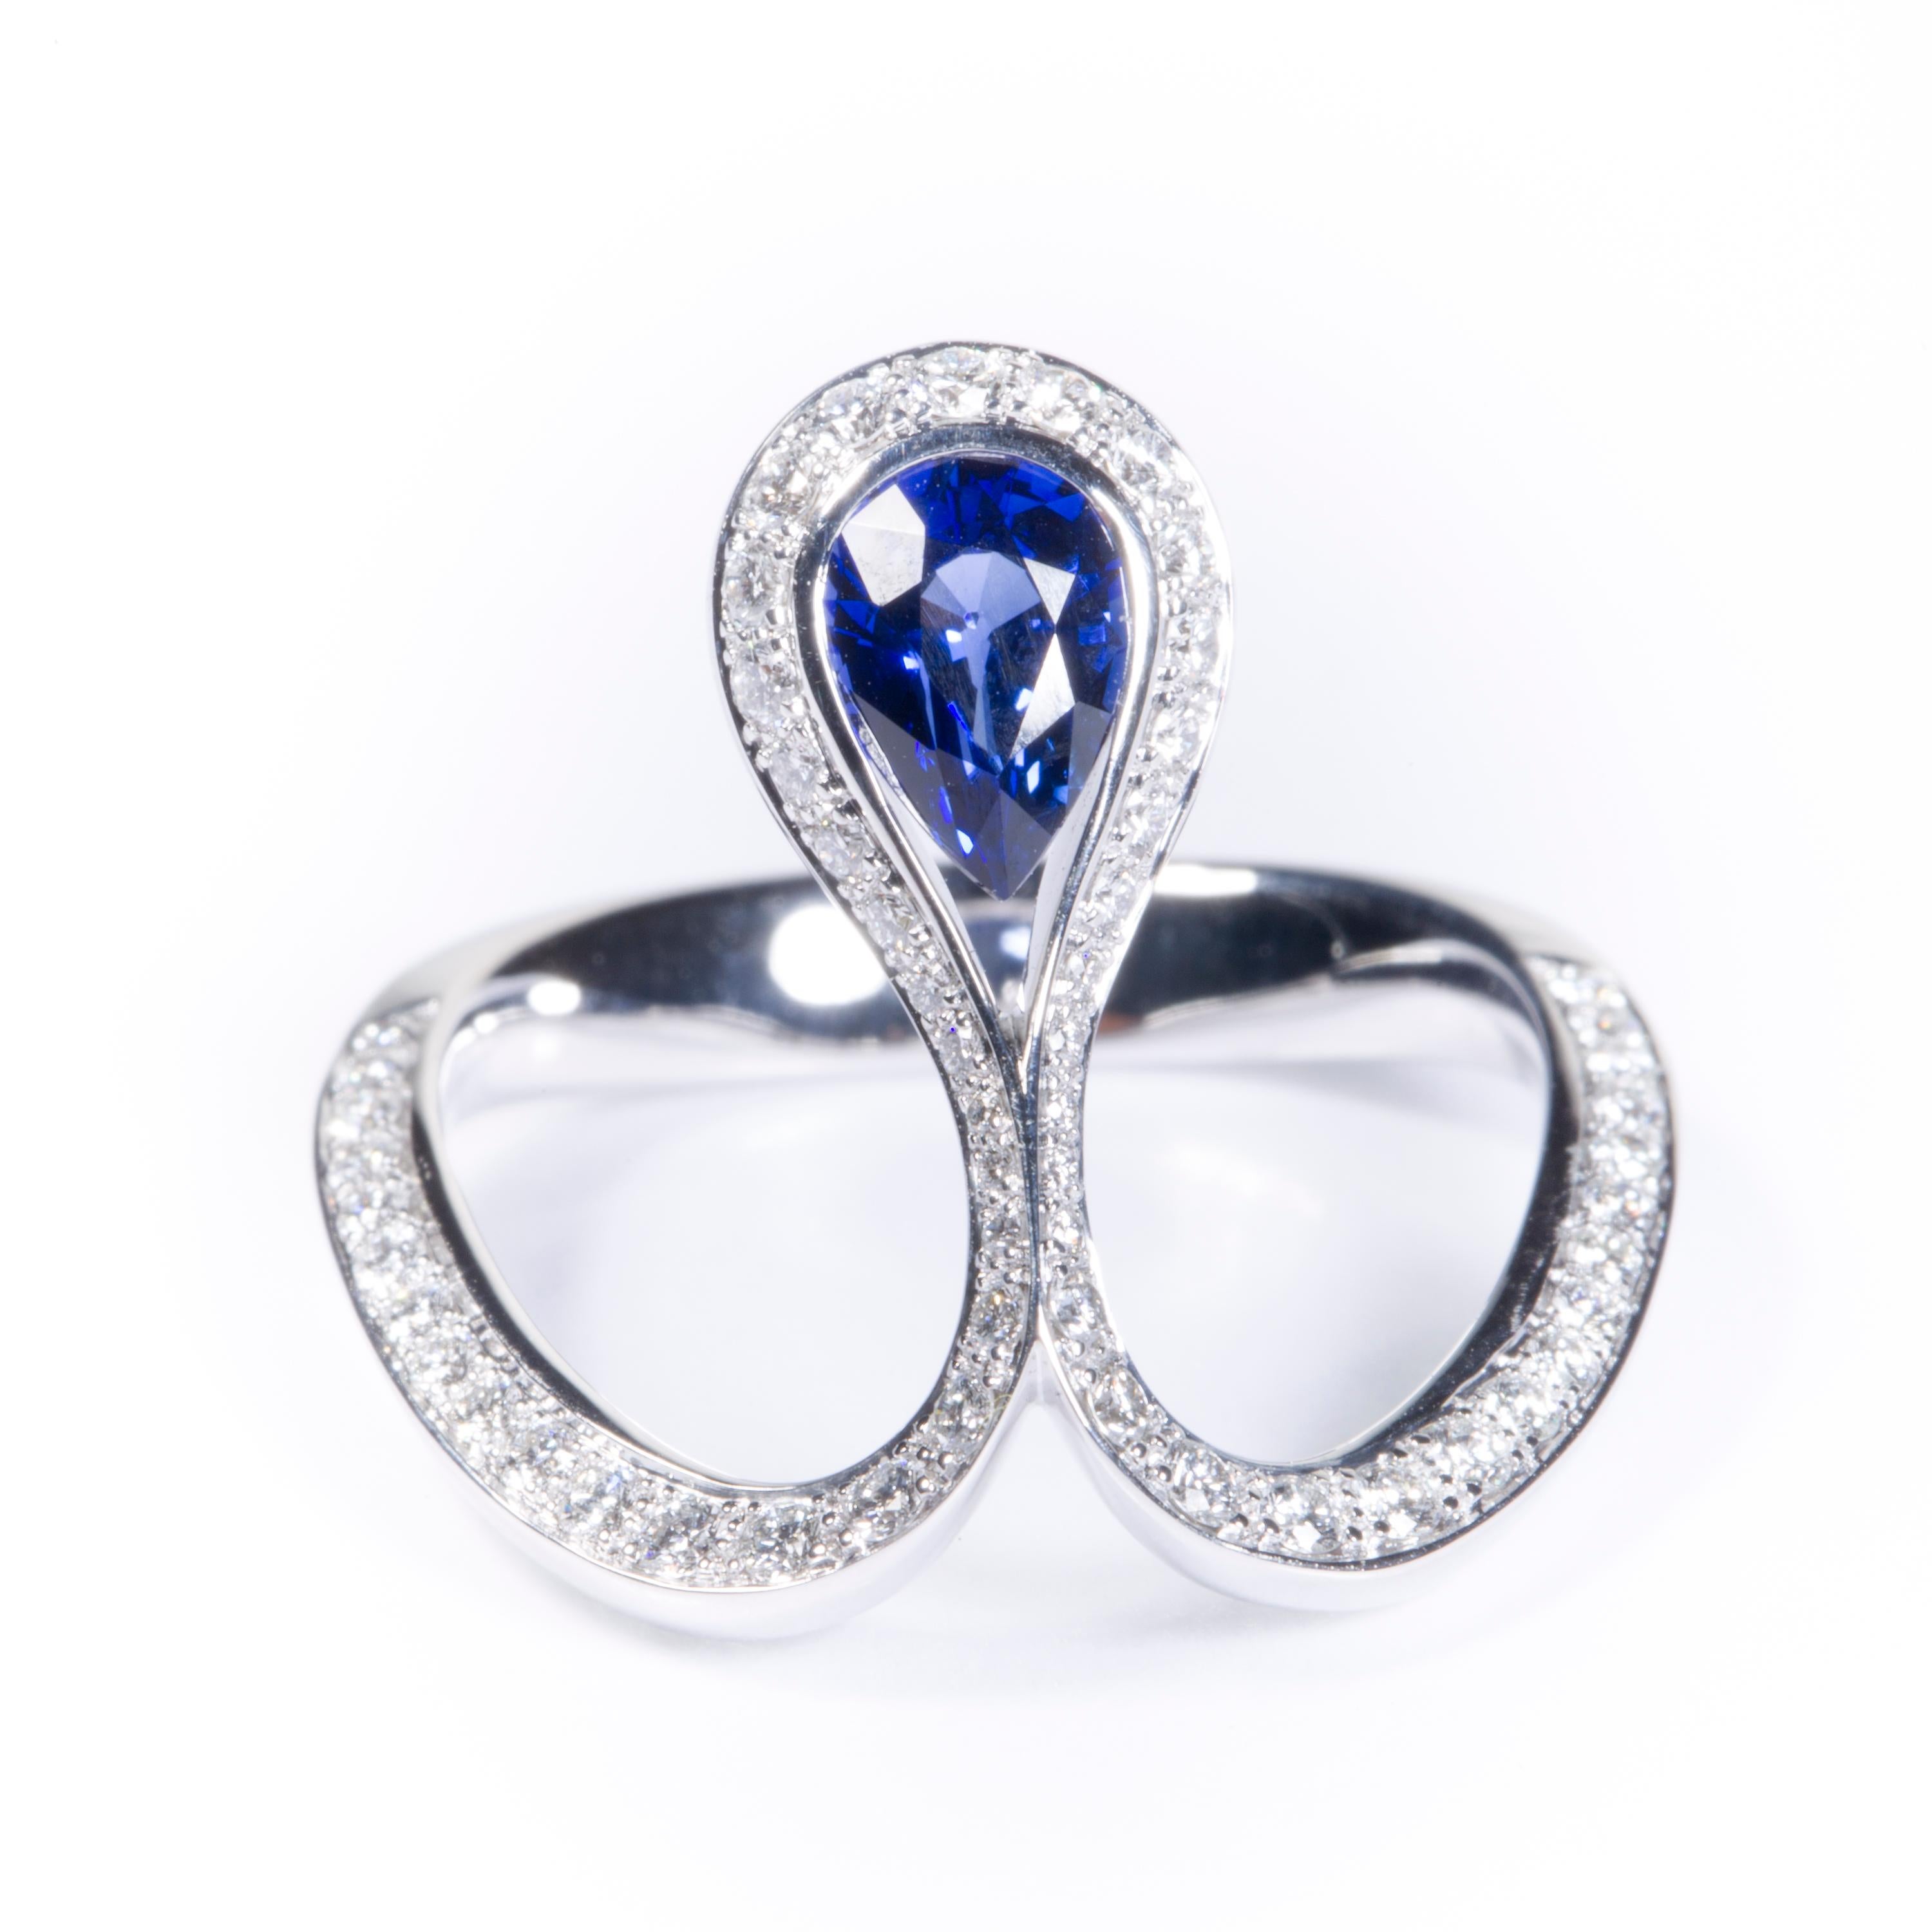 The Royals Is Inspired By Drops Of Light, Dew And Precious Stones, And Like A Vine Of Blossoming Gemstones It Frames The Beauty Of Women. Celebrating A 0.84ct Pear Blue Sapphire, This Magnificent Ring Gives All Its Meaning To The Word 